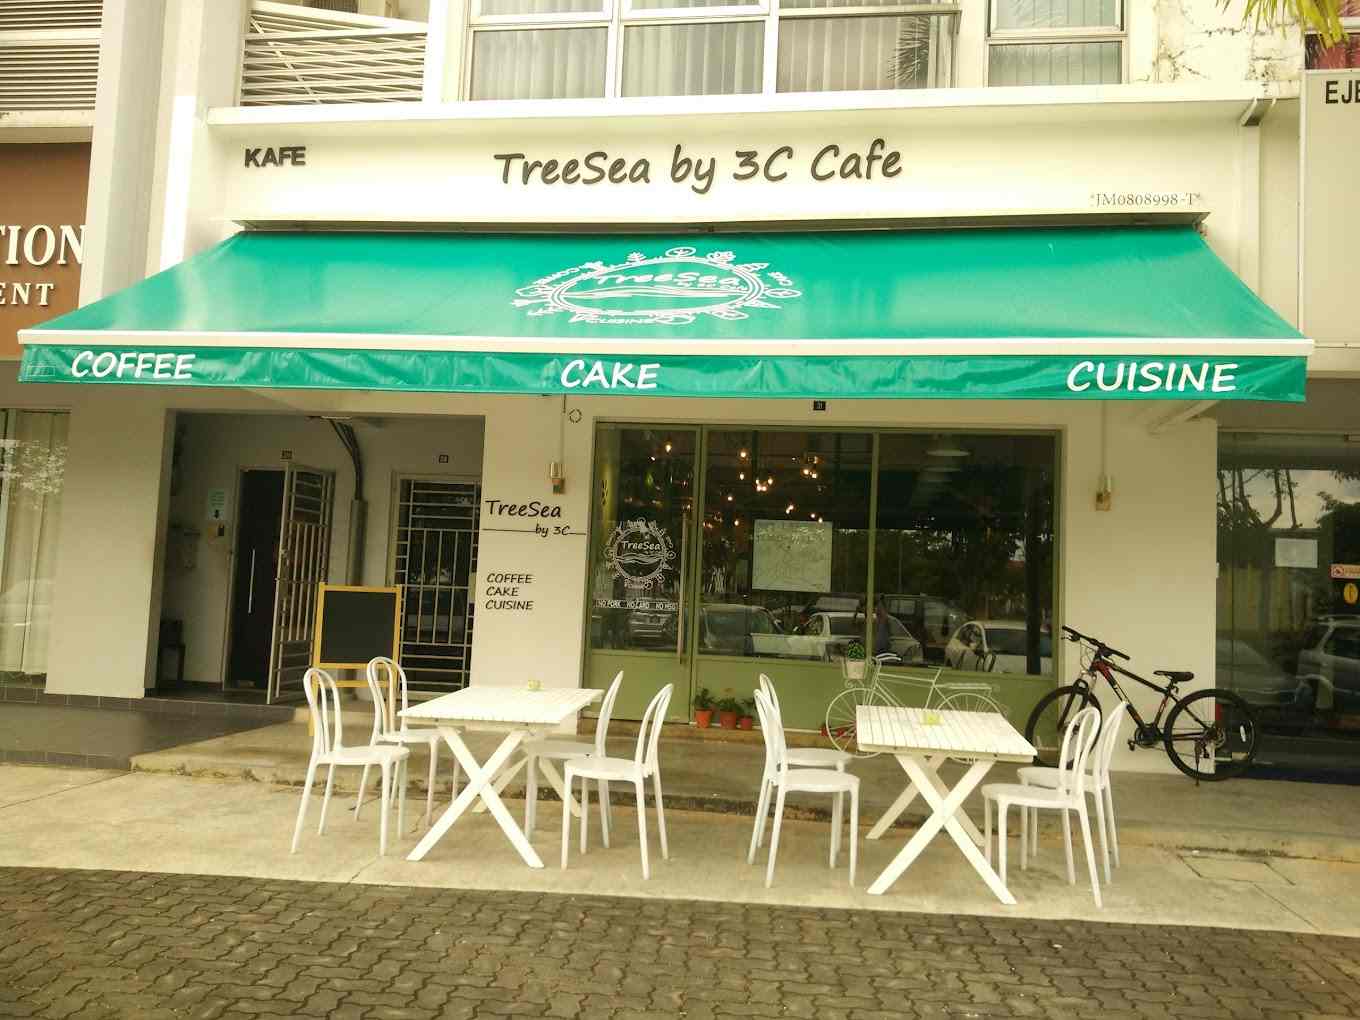 TreeSea By 3C Cafe location